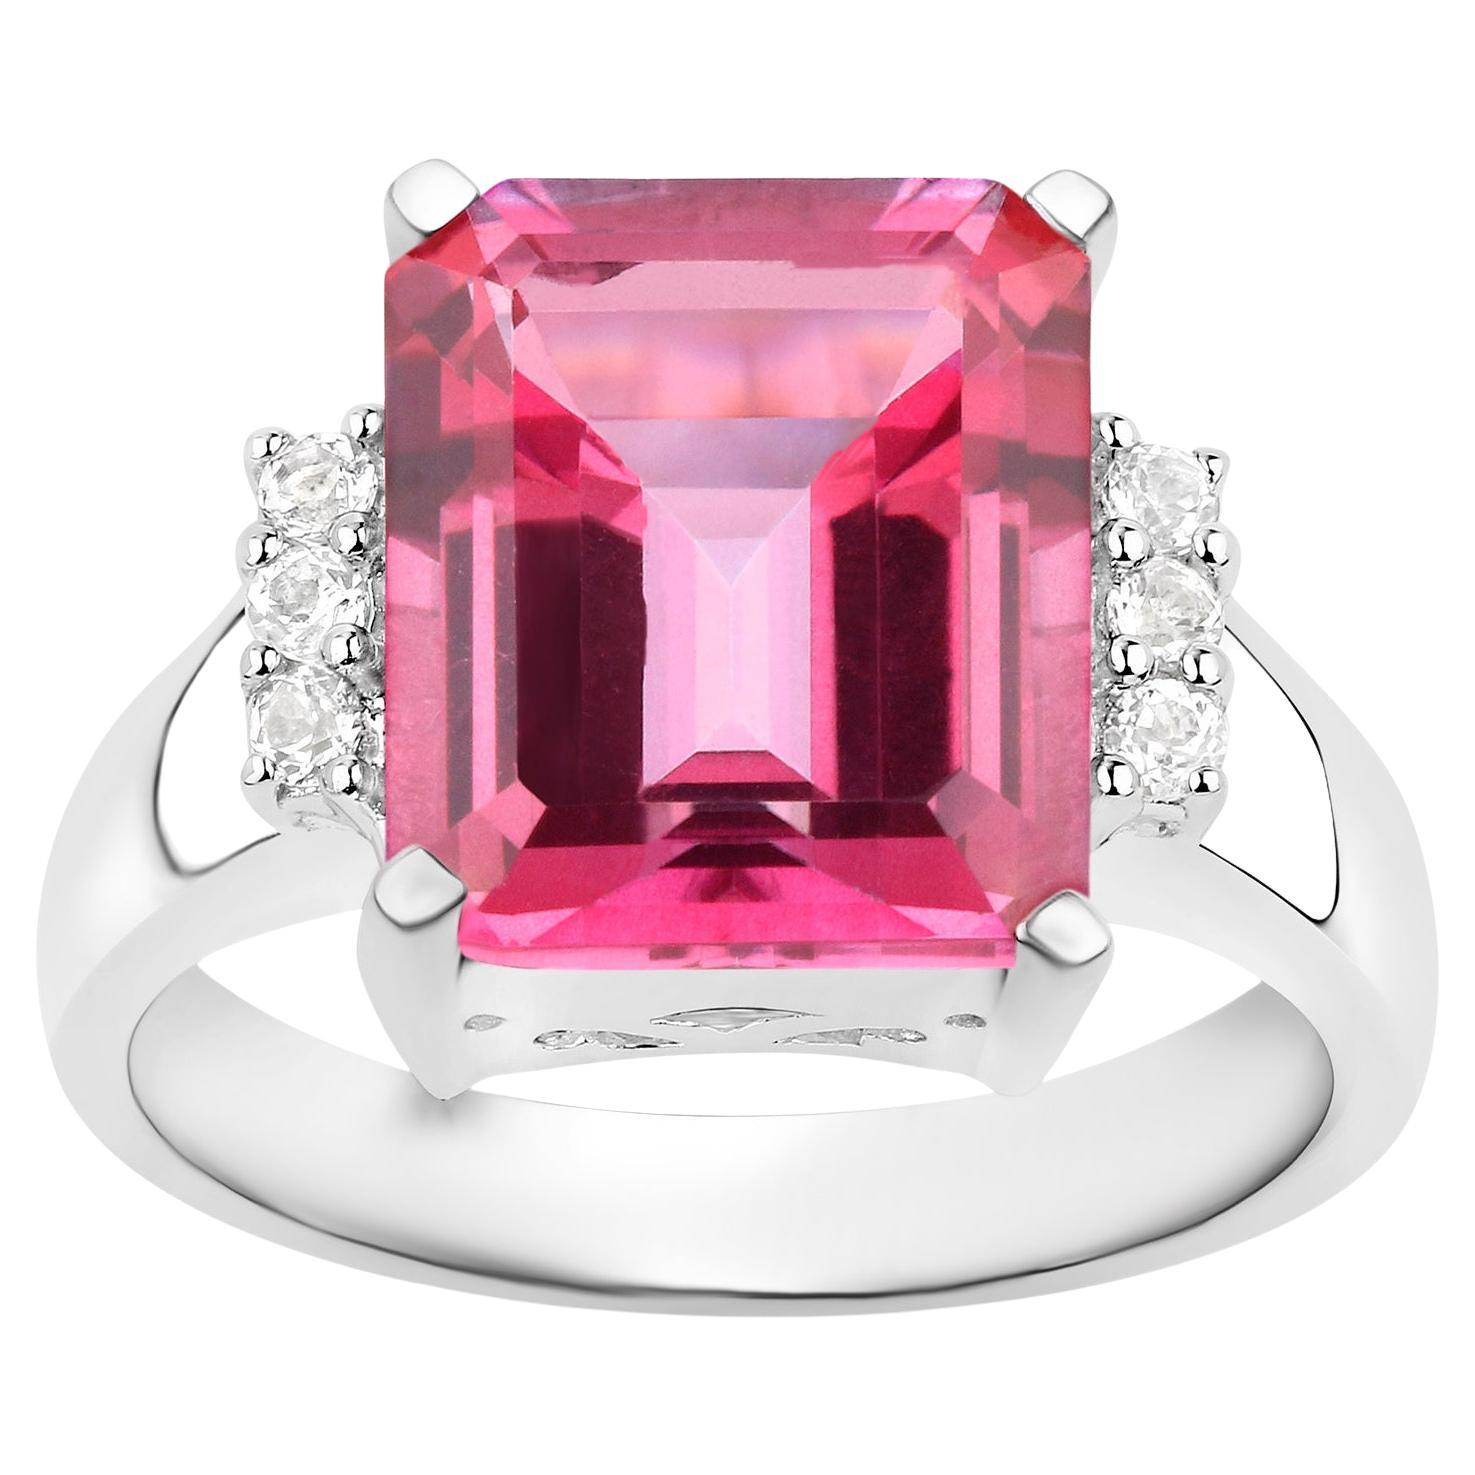 Pink Topaz Cocktail Ring White Topaz Setting 7.38 Carats For Sale